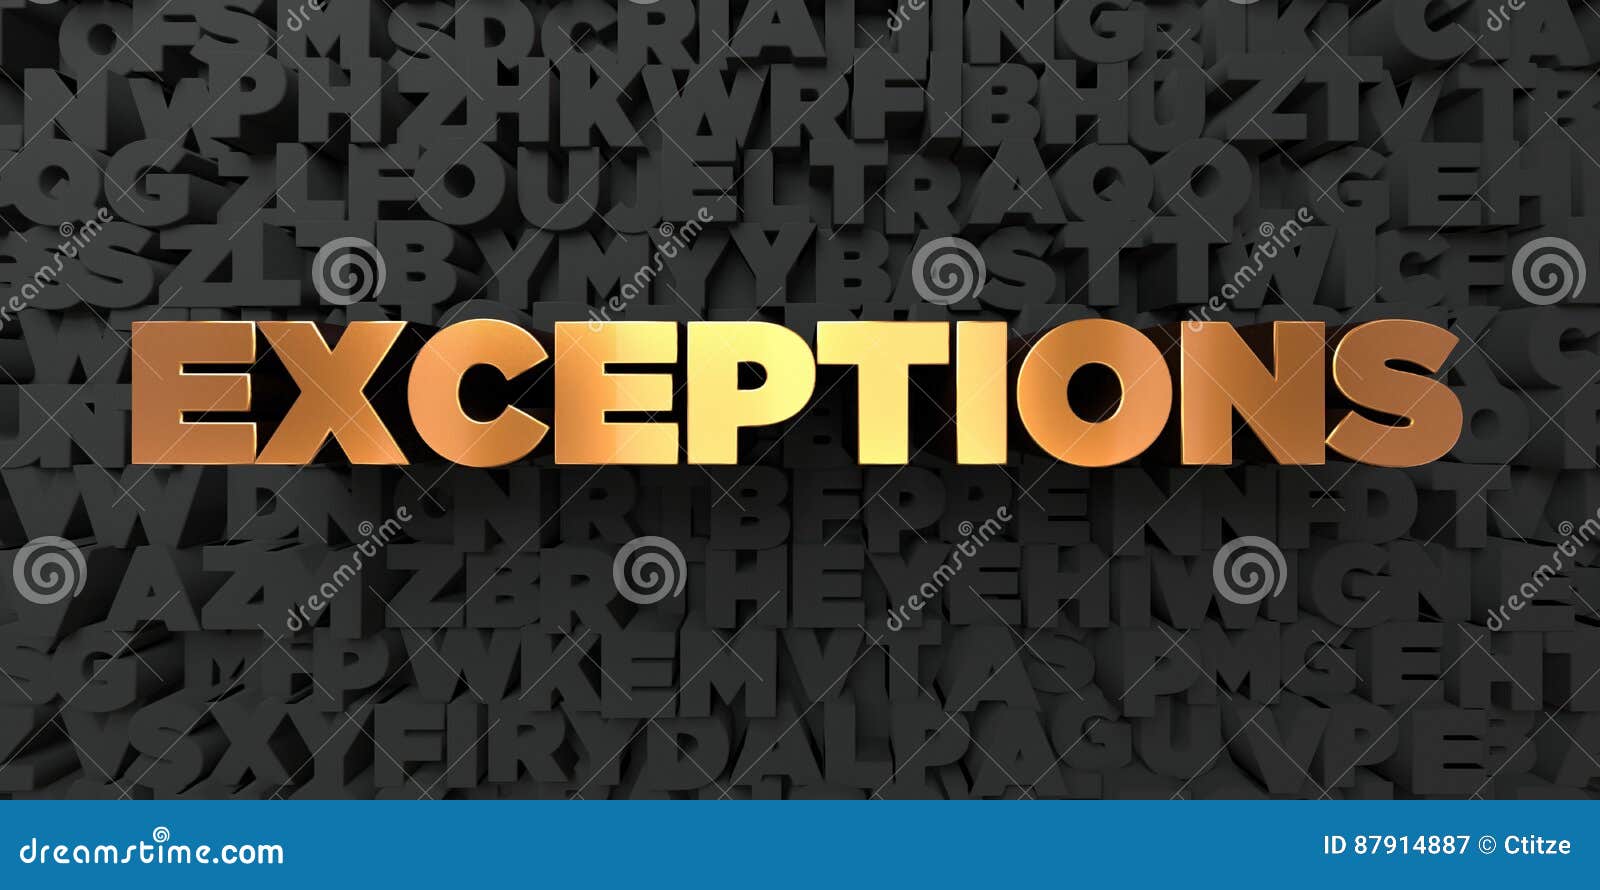 exceptions - gold text on black background - 3d rendered royalty free stock picture